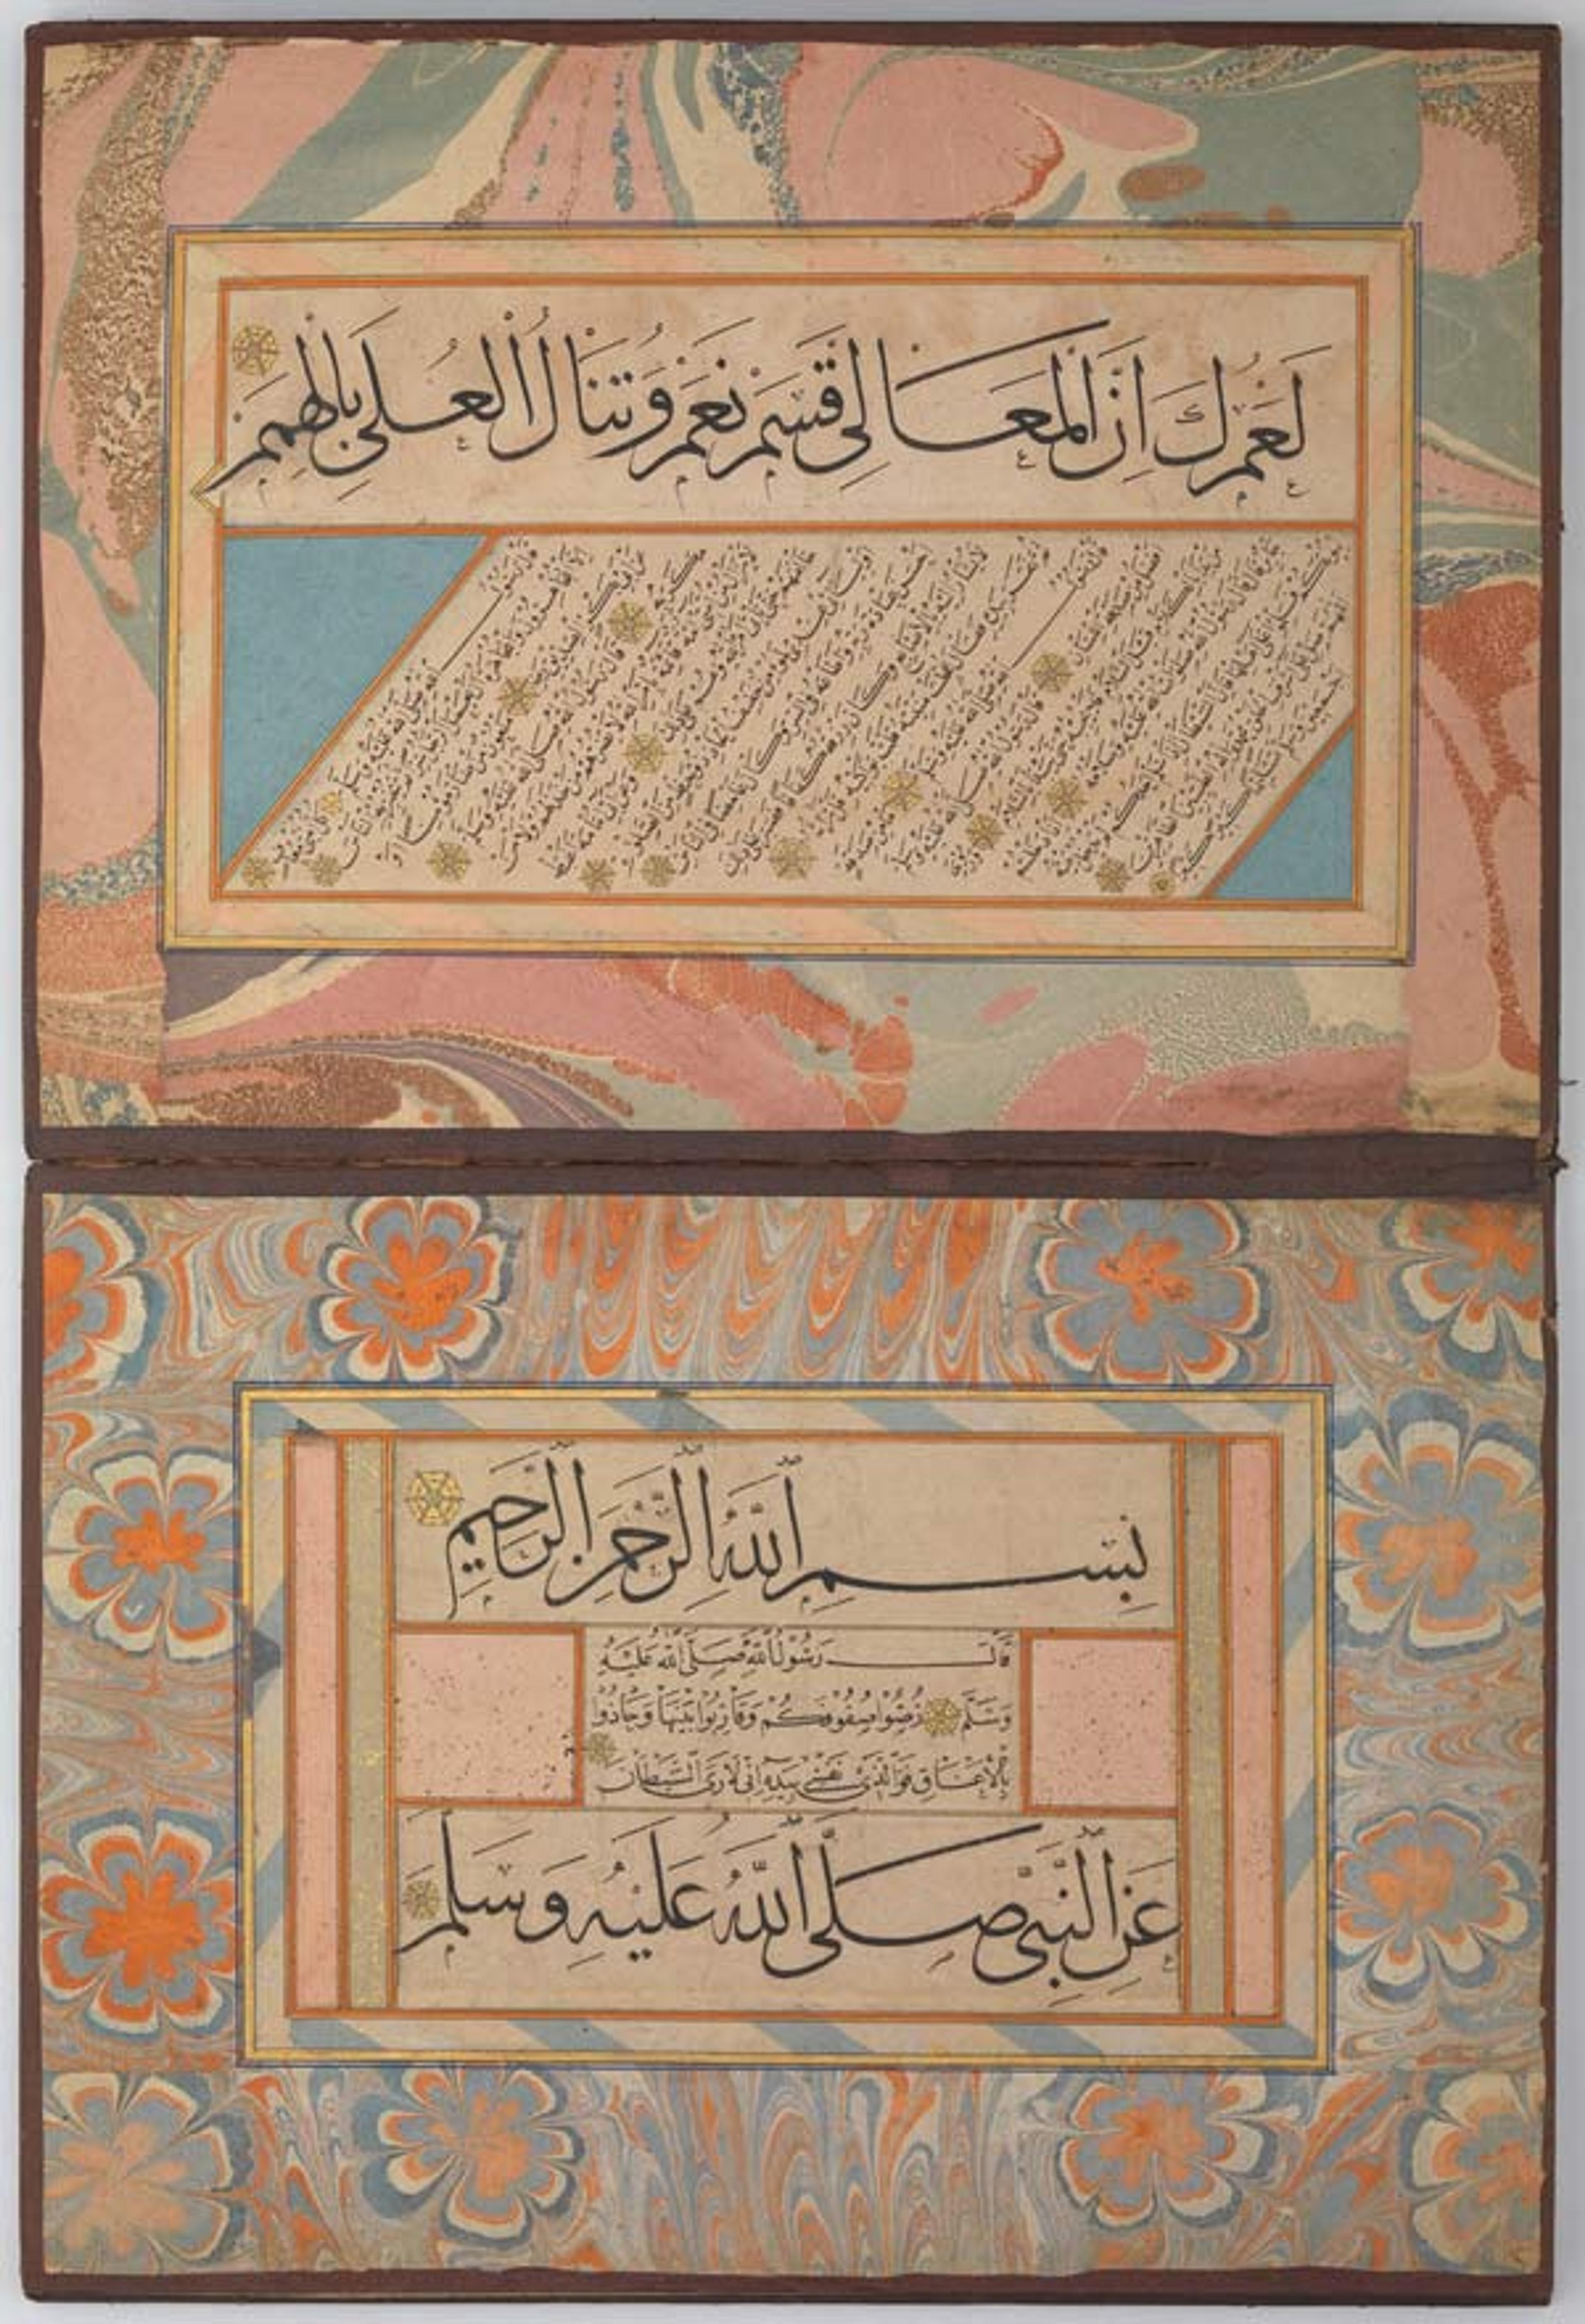 Calligrapher: Shaikh Hamdullah ibn Mustafa Dede (d.1520). Album of Calligraphies Including Poetry and Prophetic Traditions (Hadith), ca. 1500. Turkey, probably Istanbul. Islamic. Main support: ink, watercolor, and gold on paper Margins: ink, watercolor and gold; marbled paper Binding: leather and gold. The Metropolitan Museum of Art, New York, Purchase, Edwin Binney 3rd and Edward Ablat Gifts, 1982 (1982.120.3)